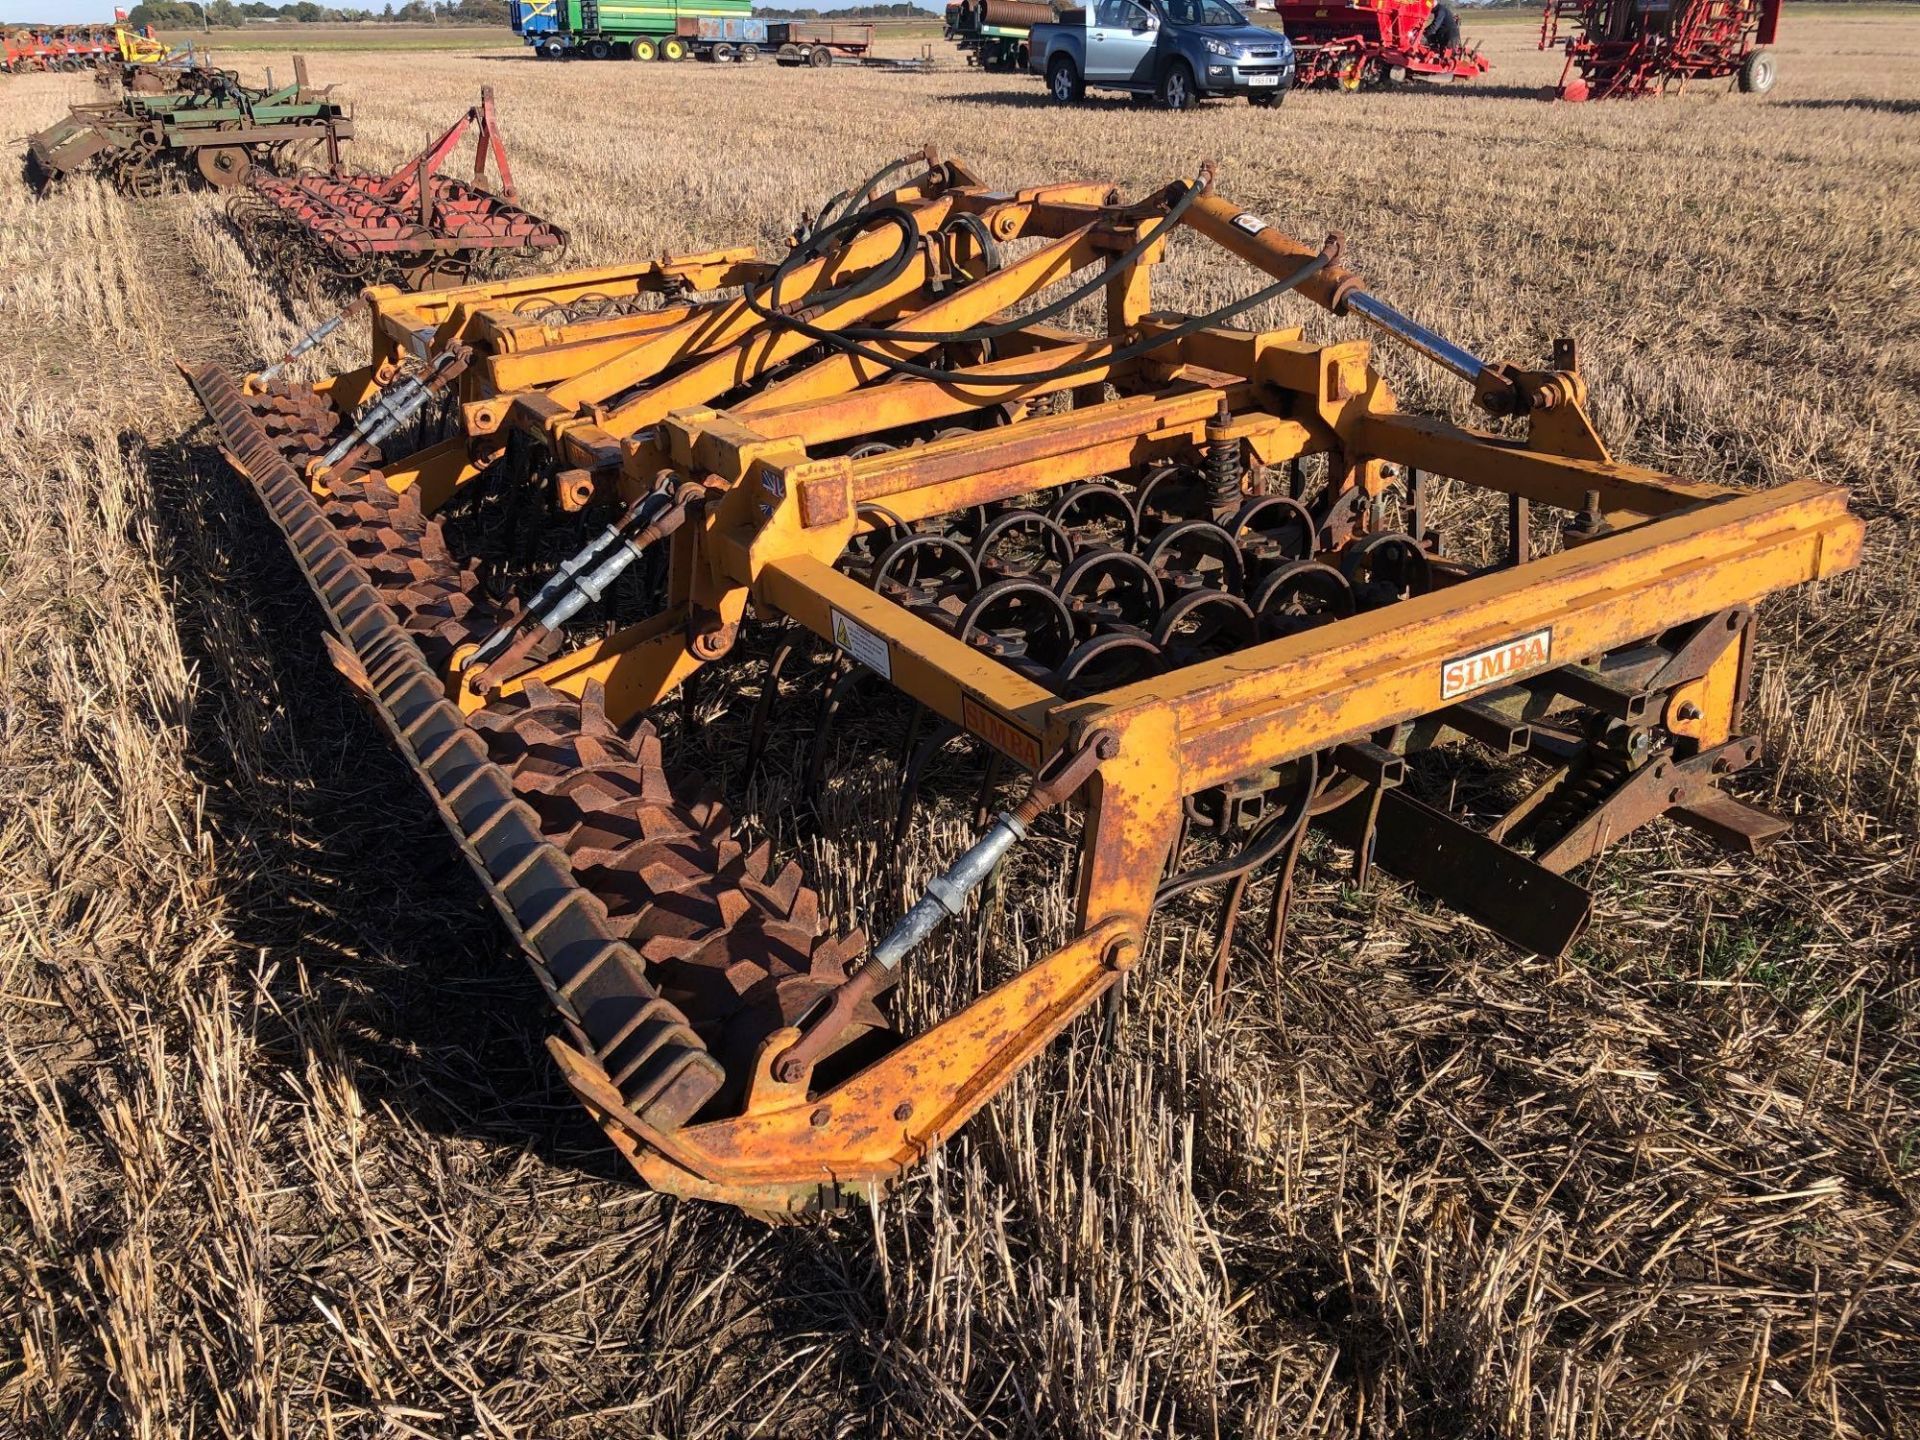 1994 Simba 4.5m springtine cultivator hydraulic folding with front levelling board and rear tooth pa - Image 3 of 6